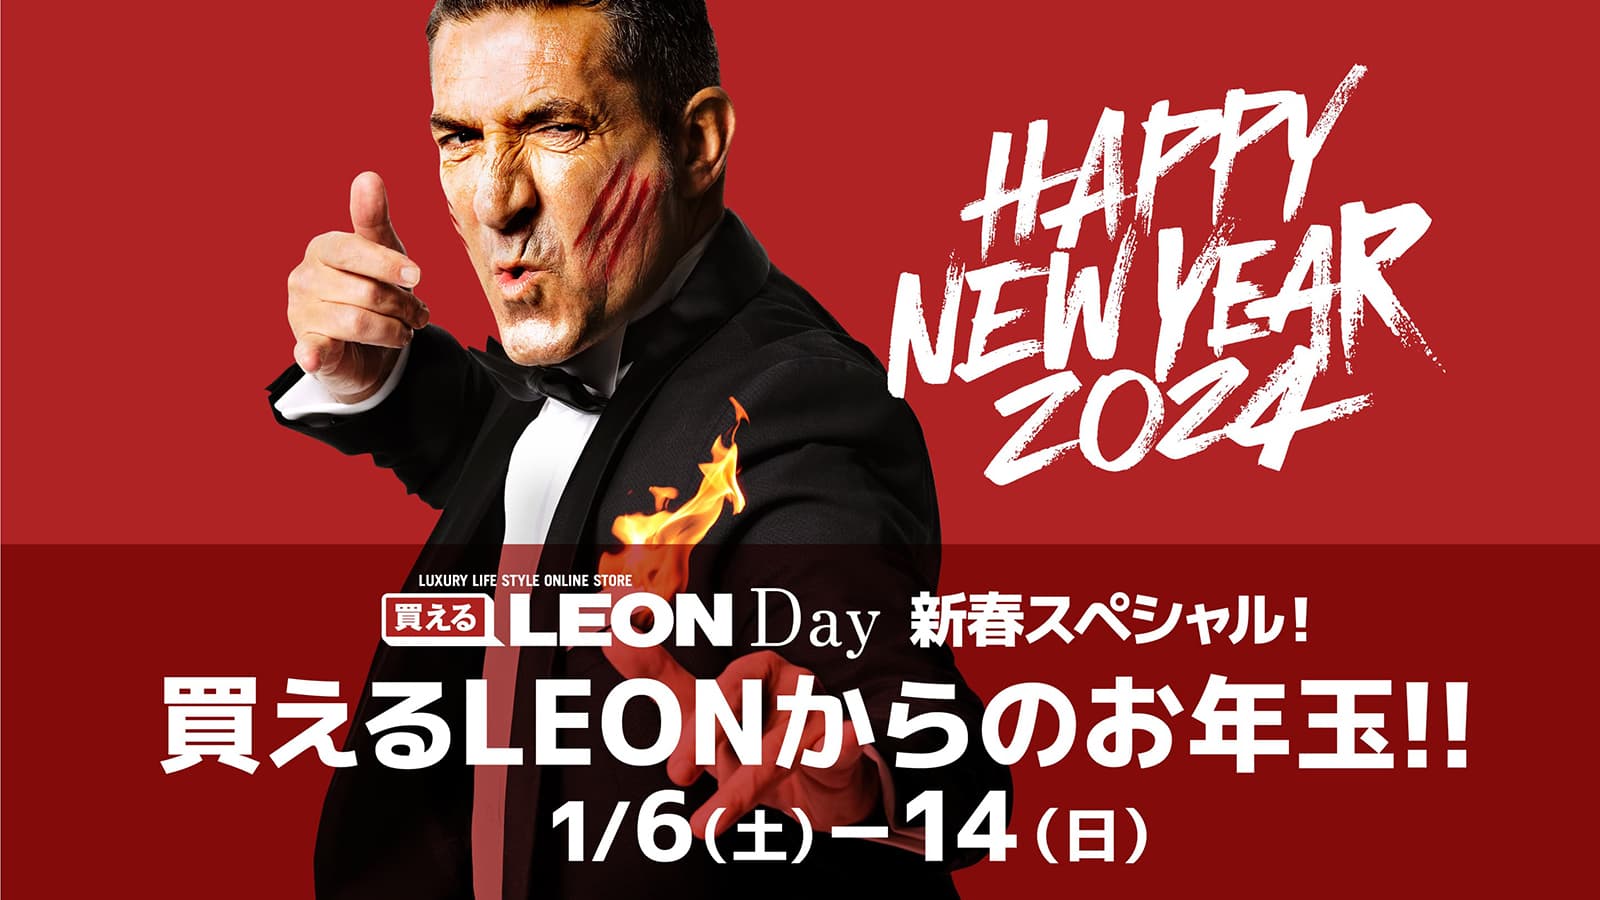 LEON DAY New Year Special available for purchase! “You can buy New Year’s gifts from LEON!!”